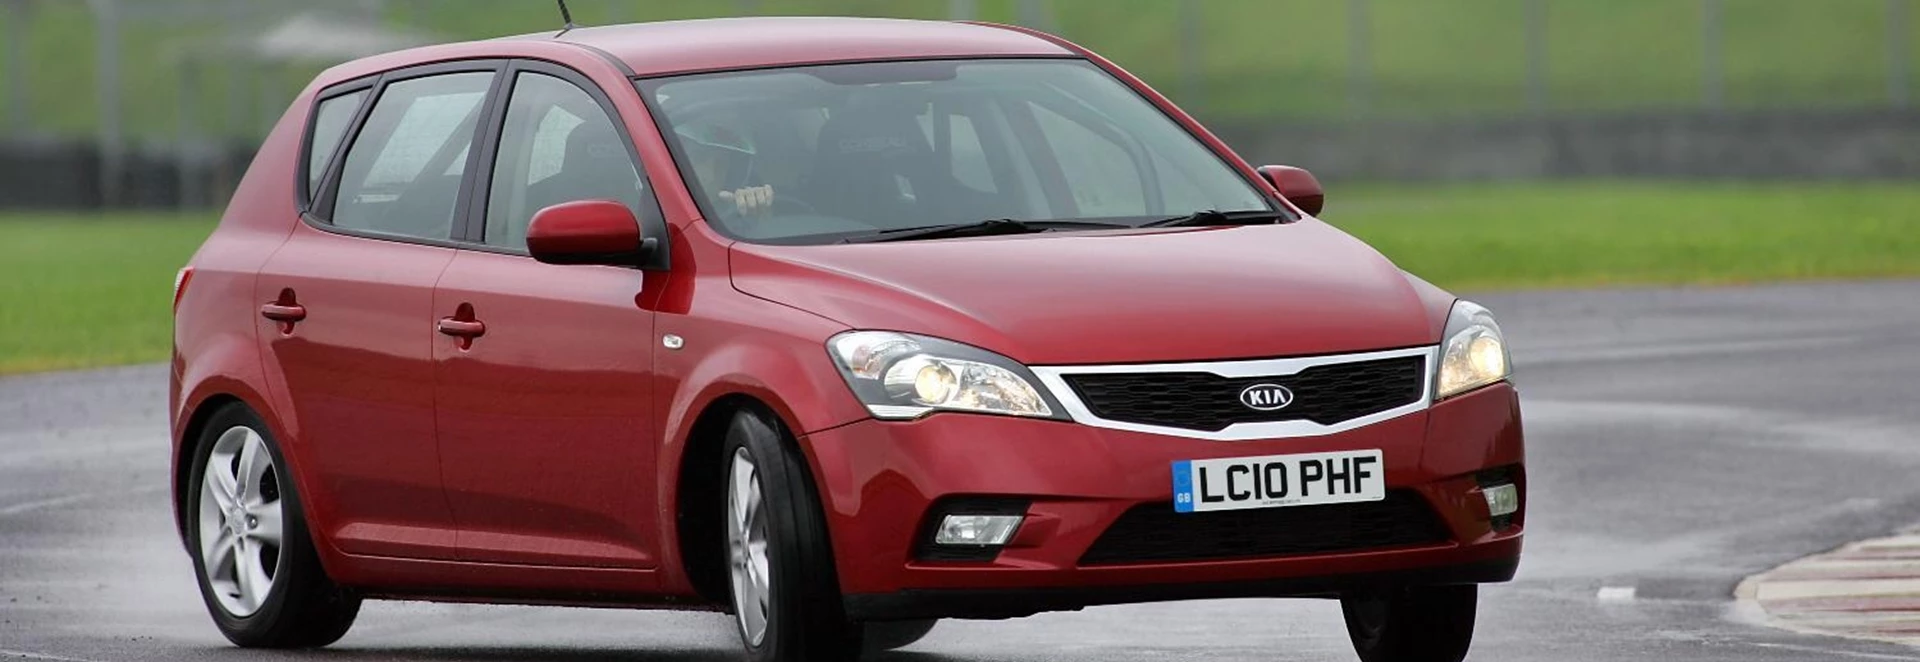 Top Gear’s Reasonably Priced Kia Cee’d Up for Sale 